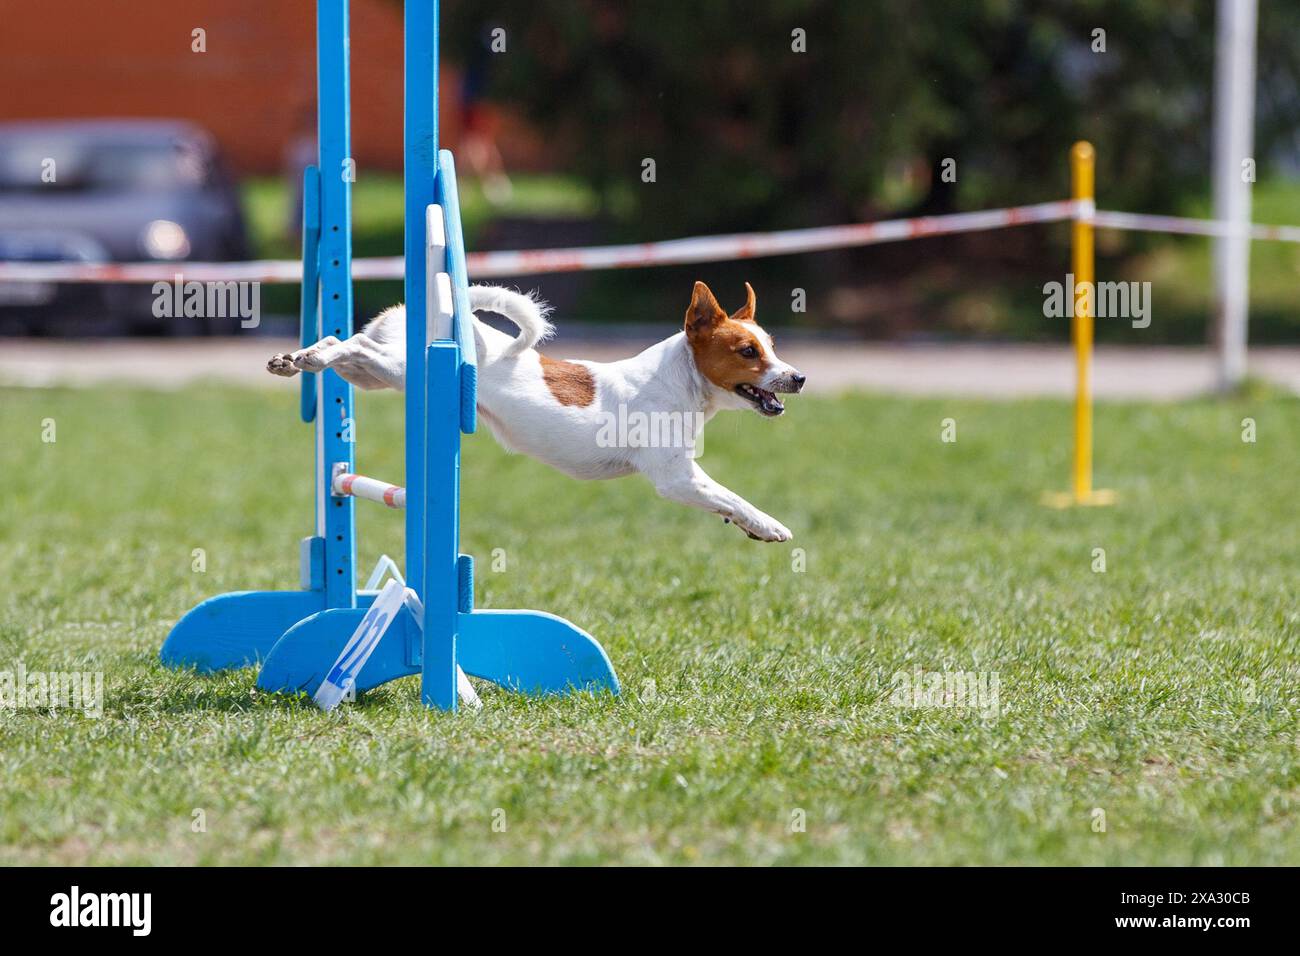 Cute brown Jack Russel terrier jumping over the hurdle on its course in dog agility event Stock Photo